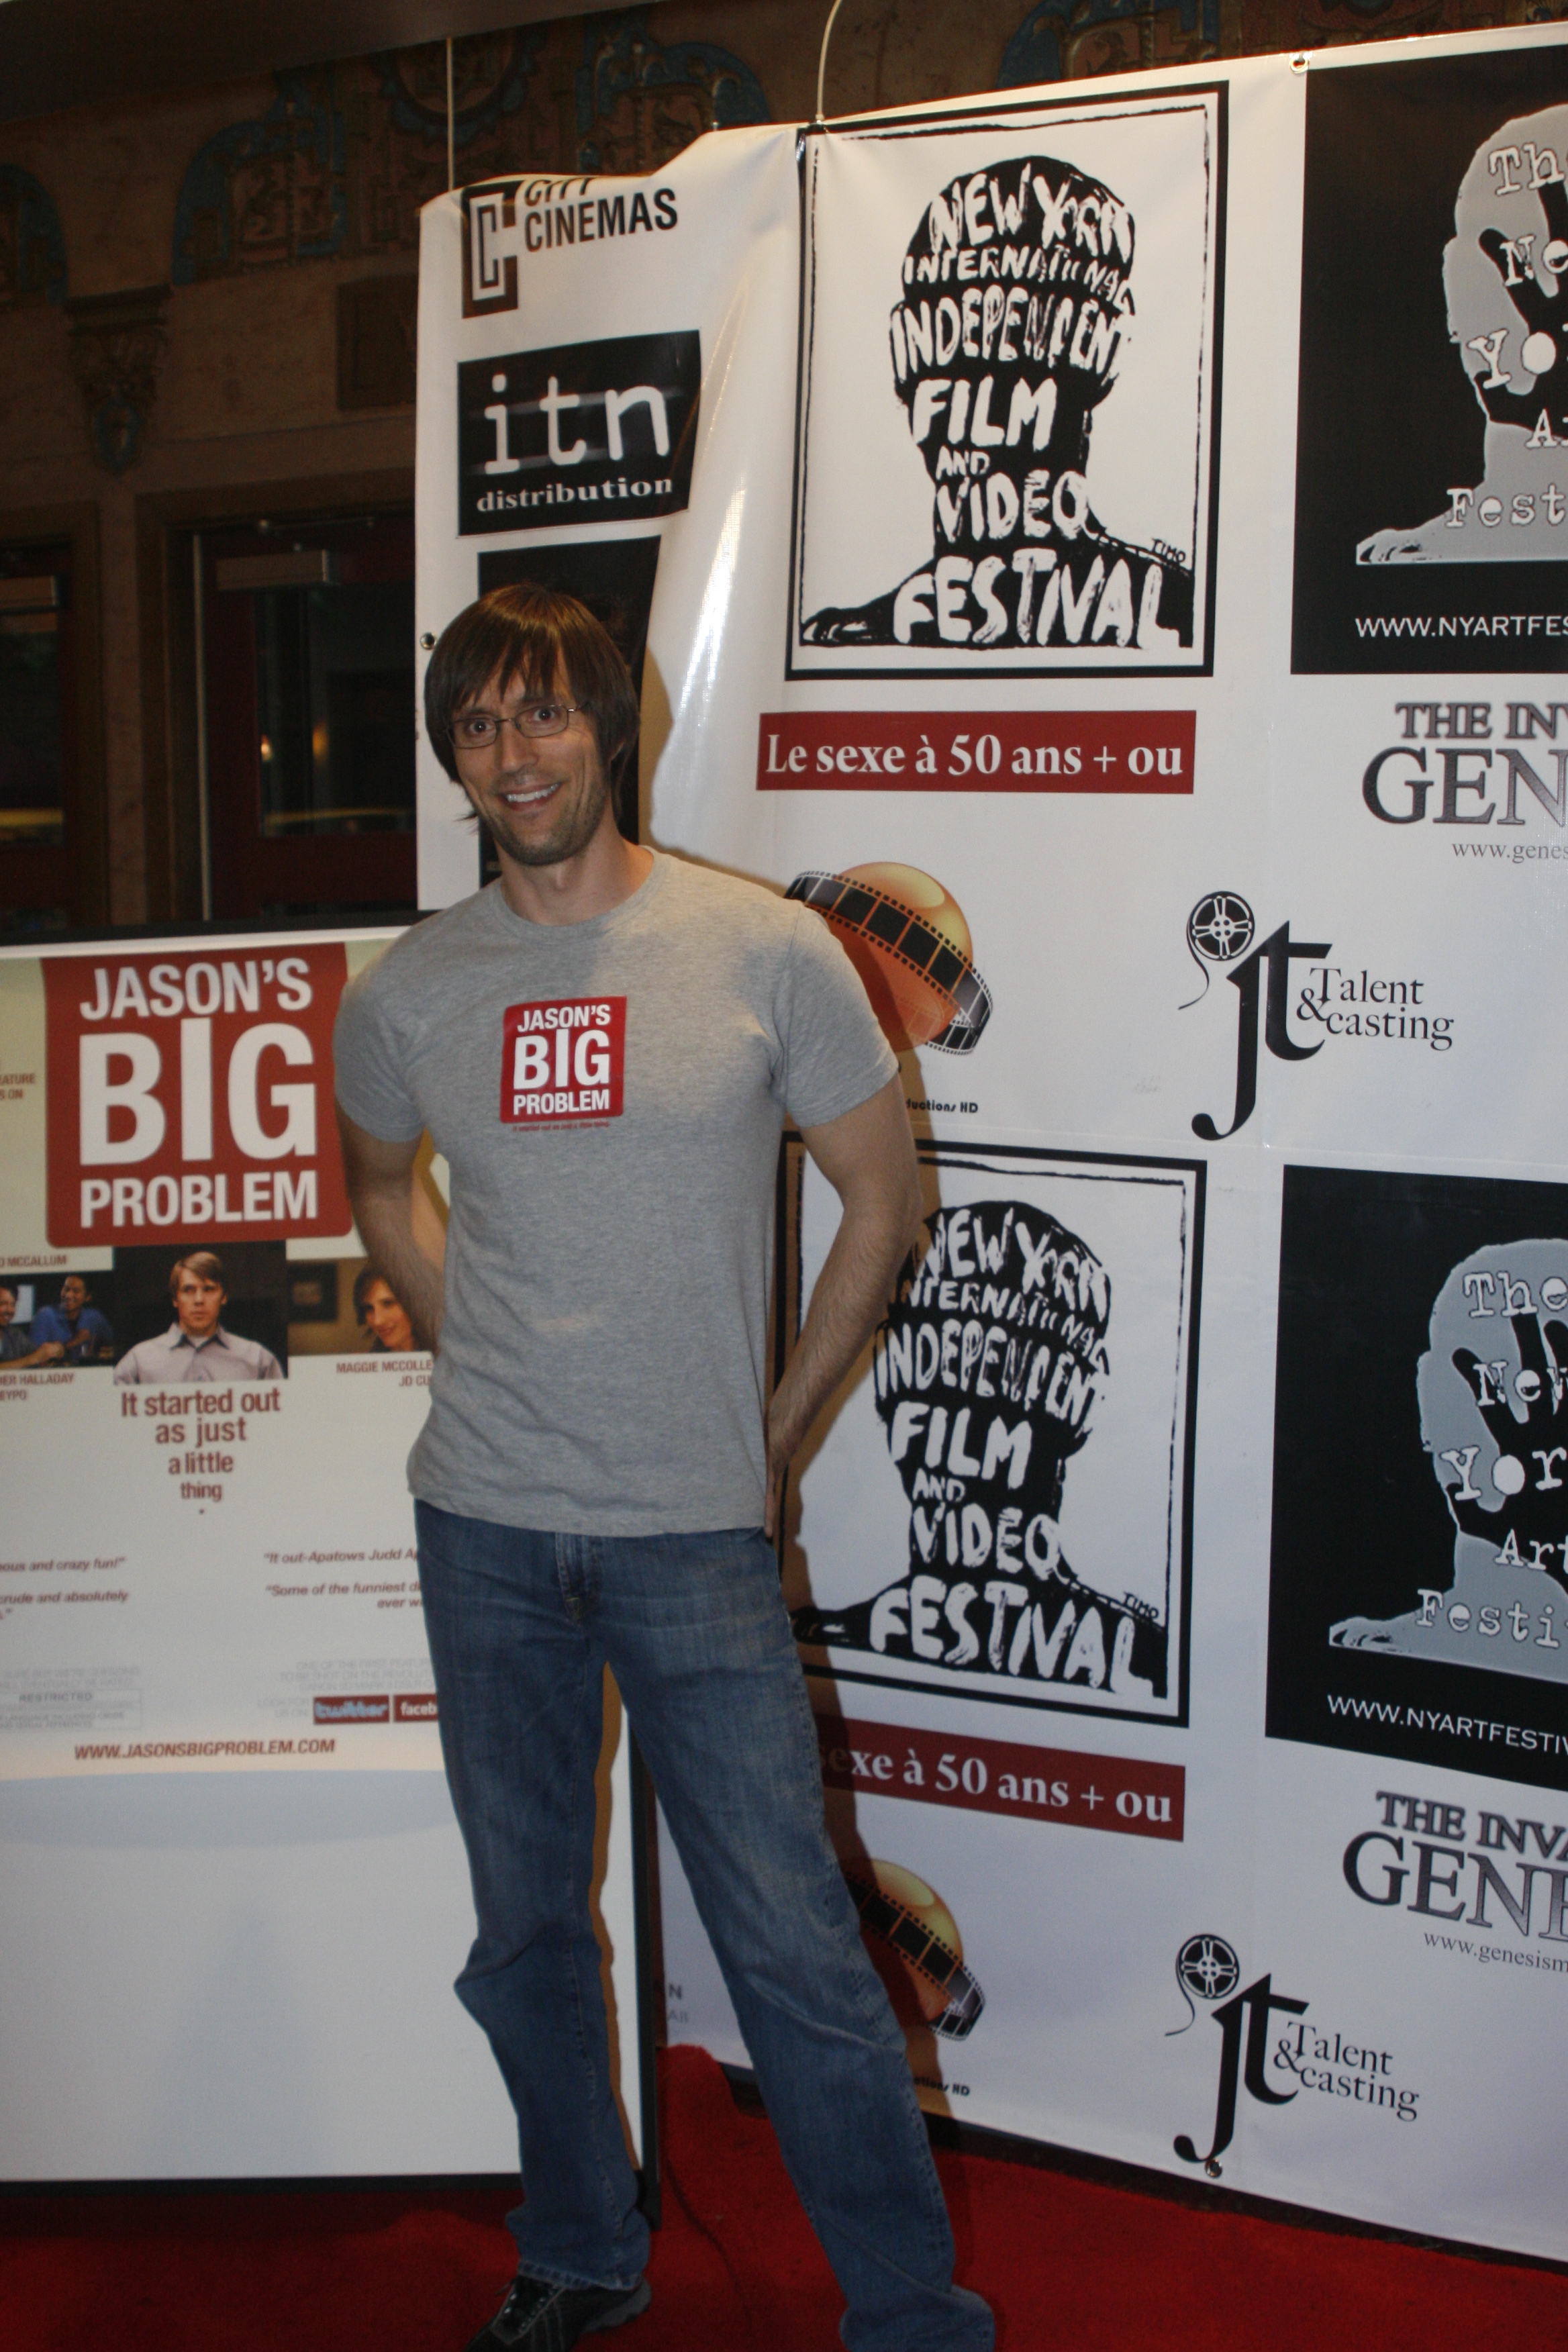 Writer-Director Hamish McCollester at NYIIFVF for the NY premiere of his comedy feature Jason's Big Problem.